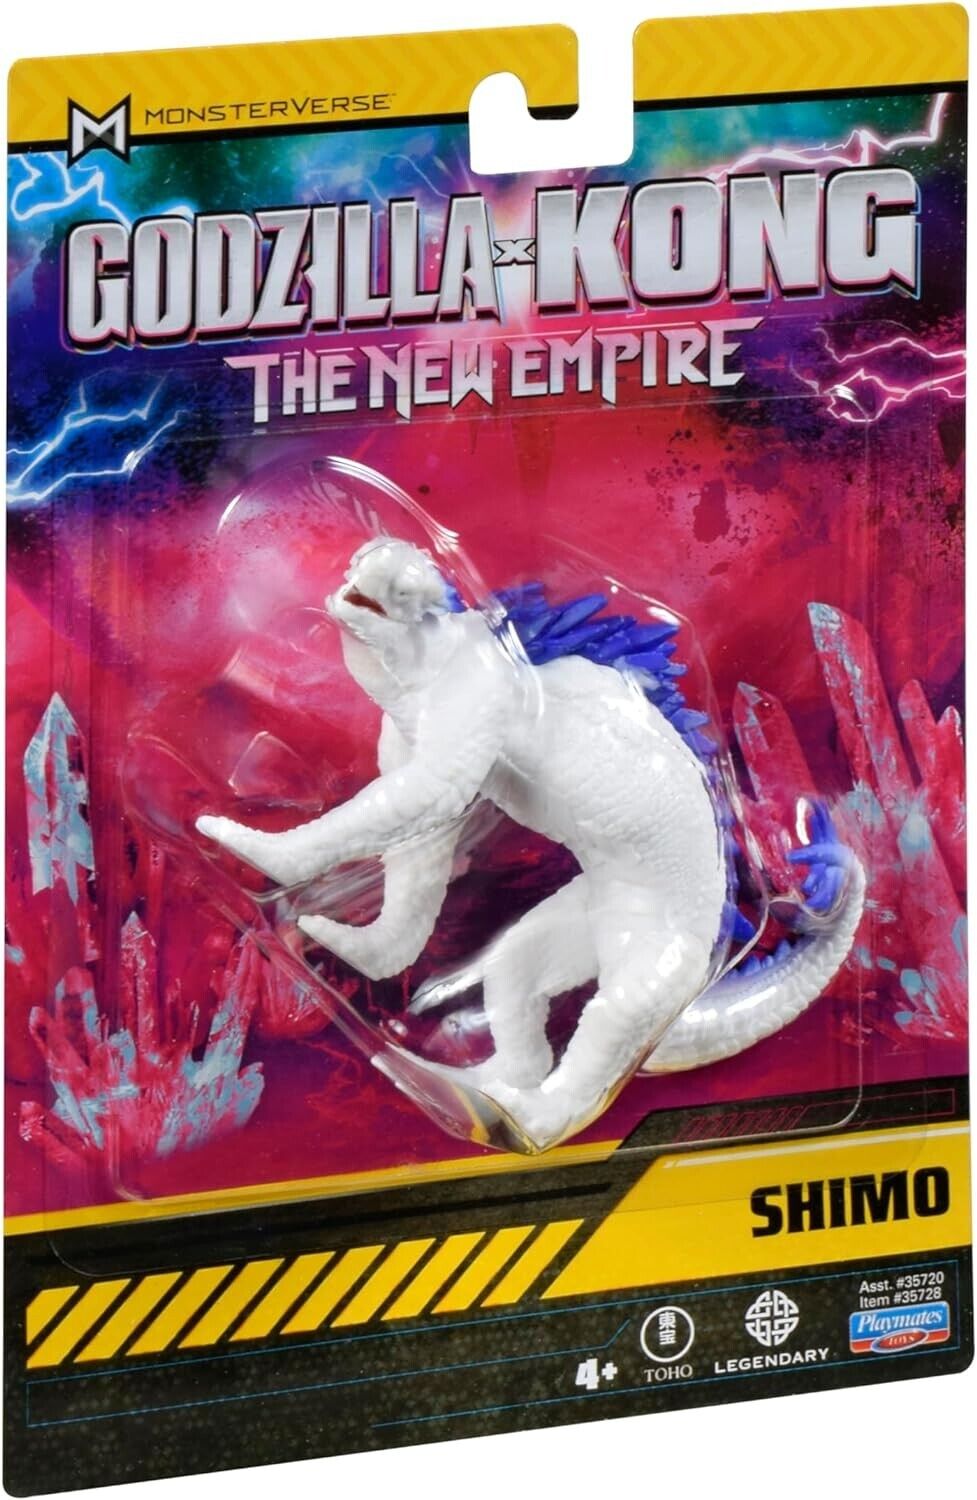 MonsterVerse Godzilla x Kong: The New Empire, 3.25 Inch Shimo Action Figure Toy,